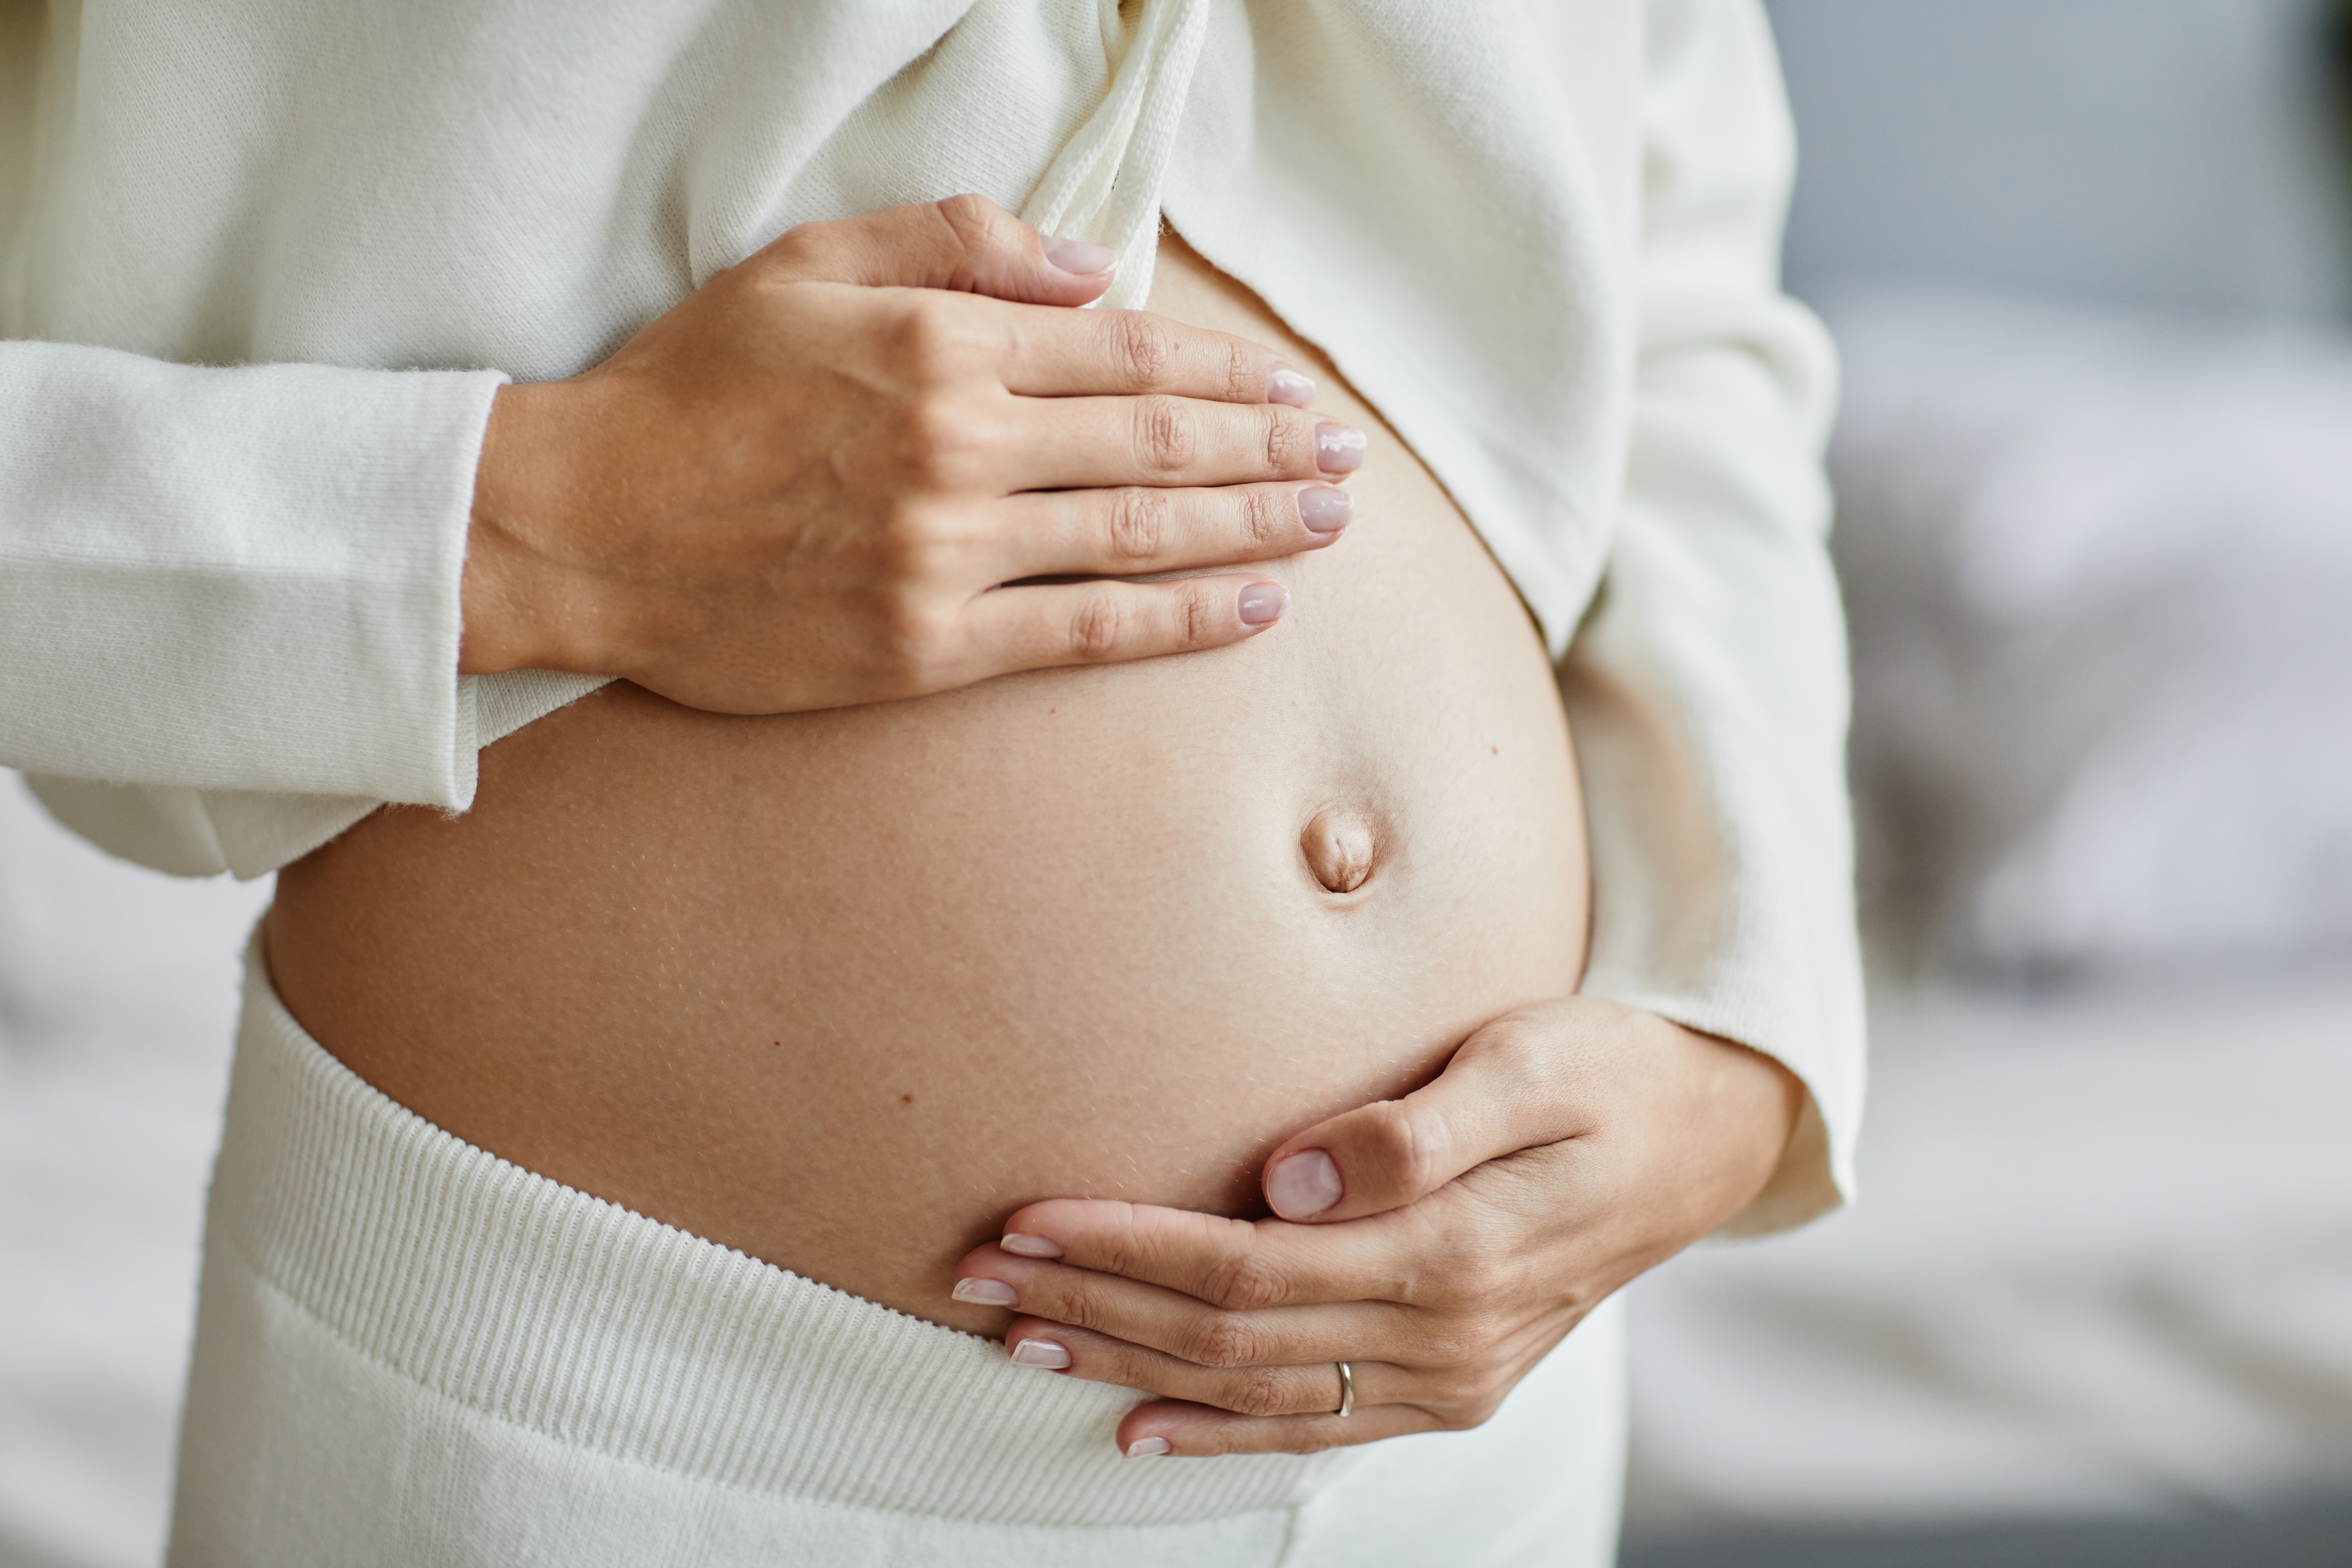 A pregnant woman cradling her stomach | Source: Shutterstock